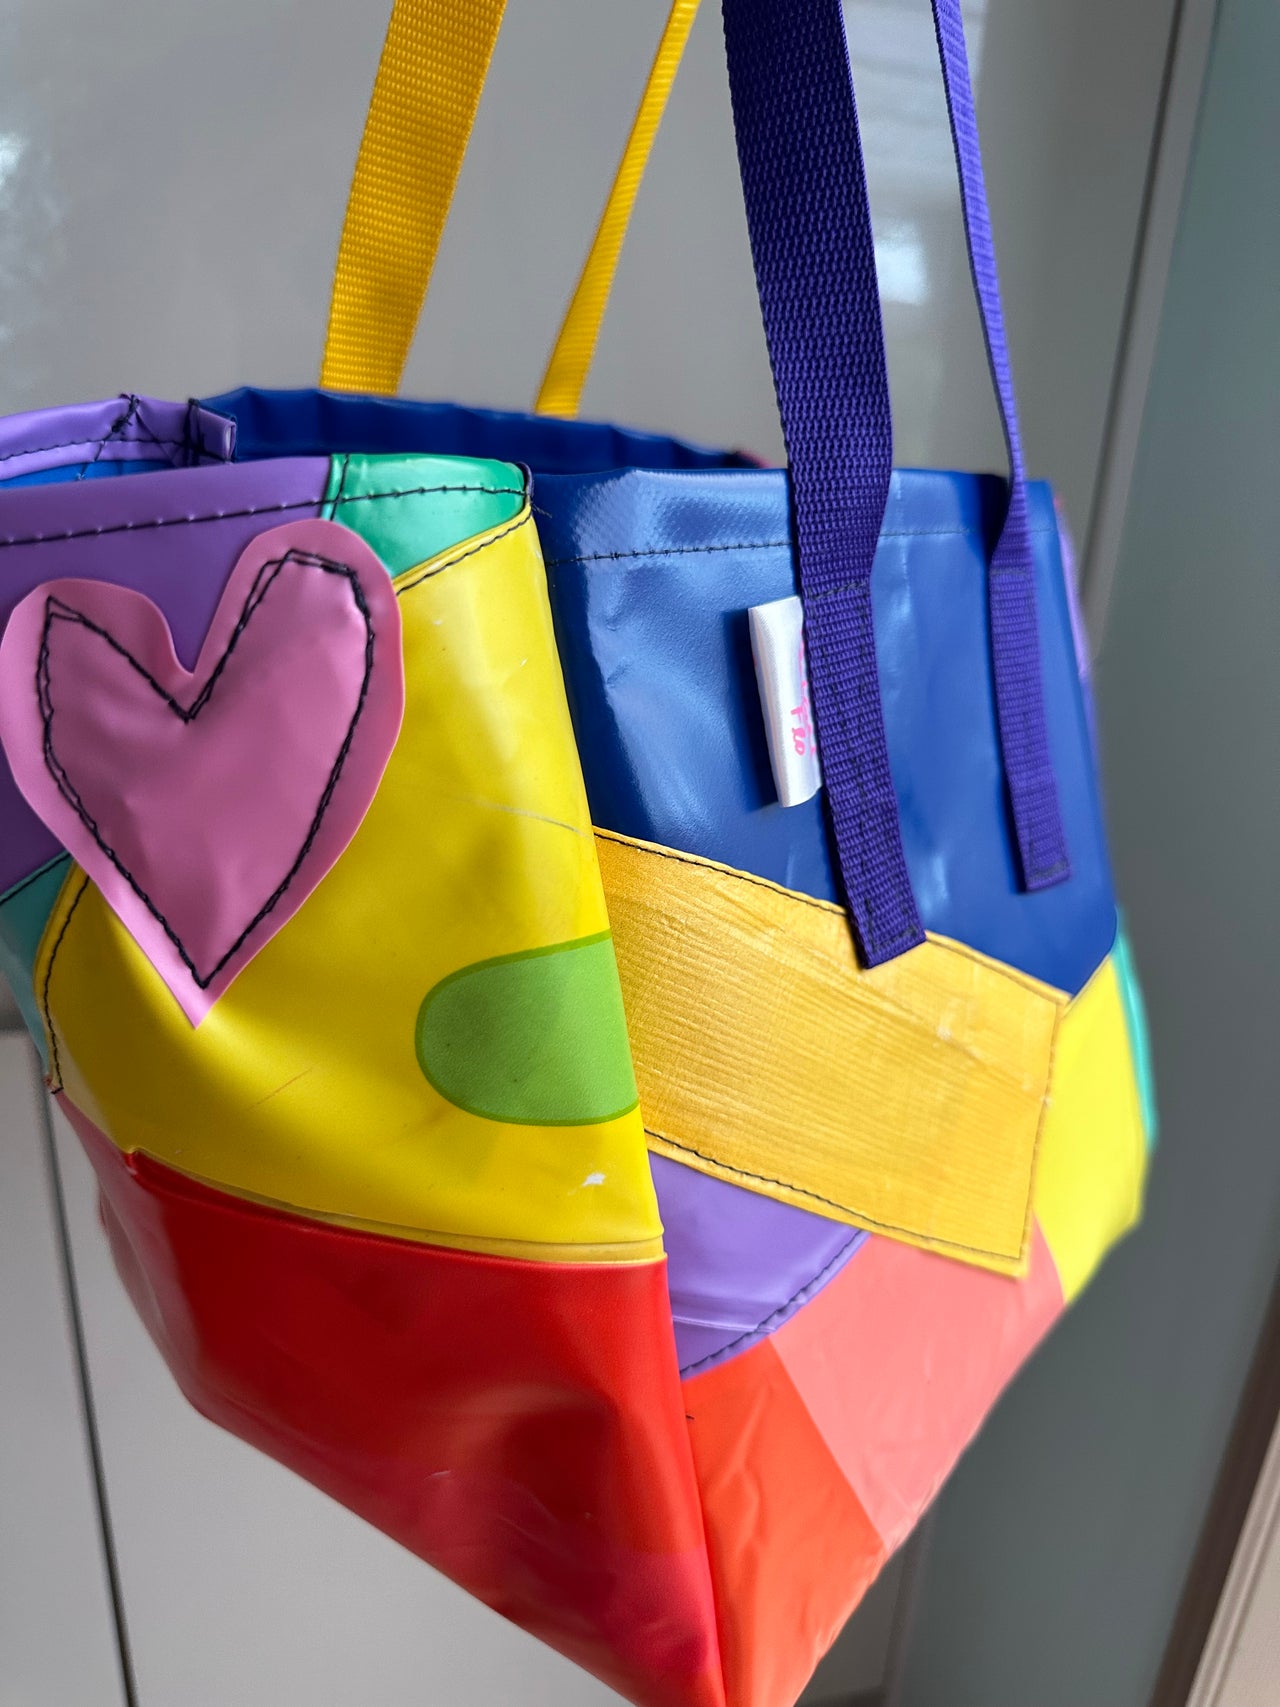 I used to be a Banner, Inflatable and Off cuts of Canopy - Larger Upcycled Rainbow Lunch Bag